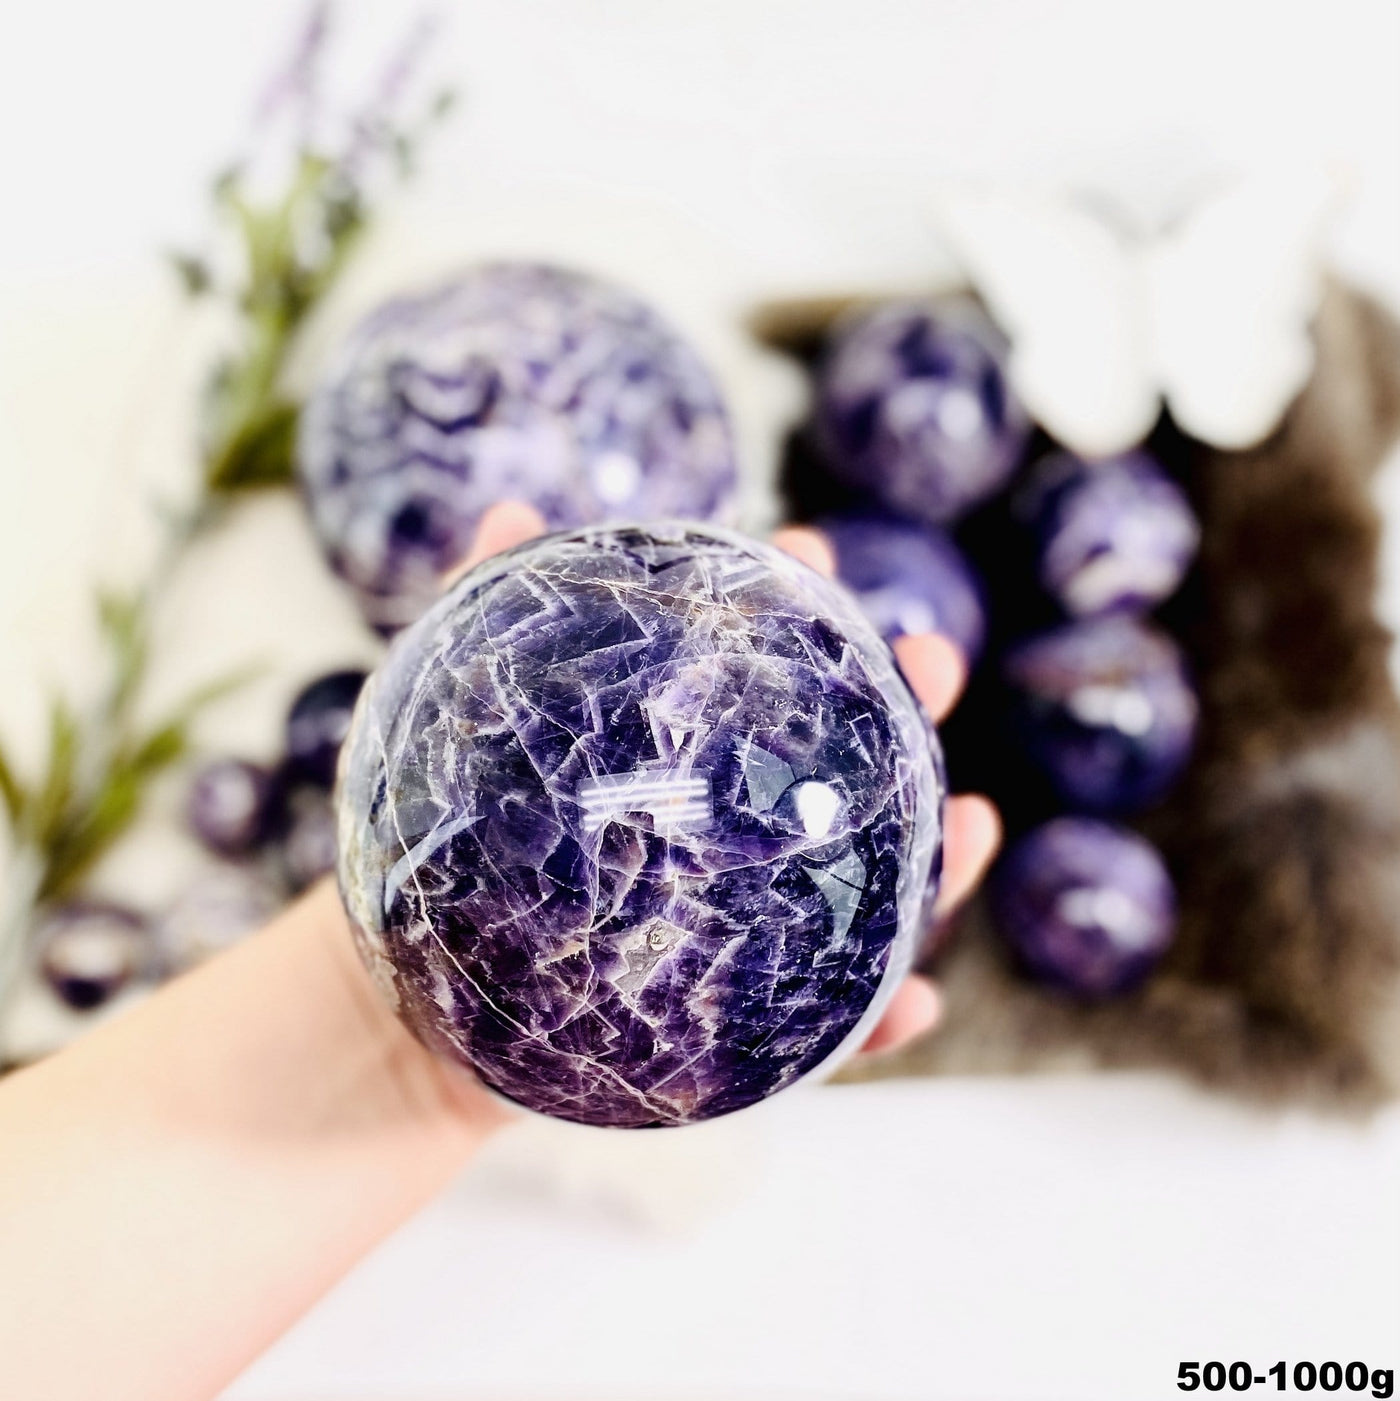 Chevron Amethyst Polished Spheres in a hand, size under 500g-100g